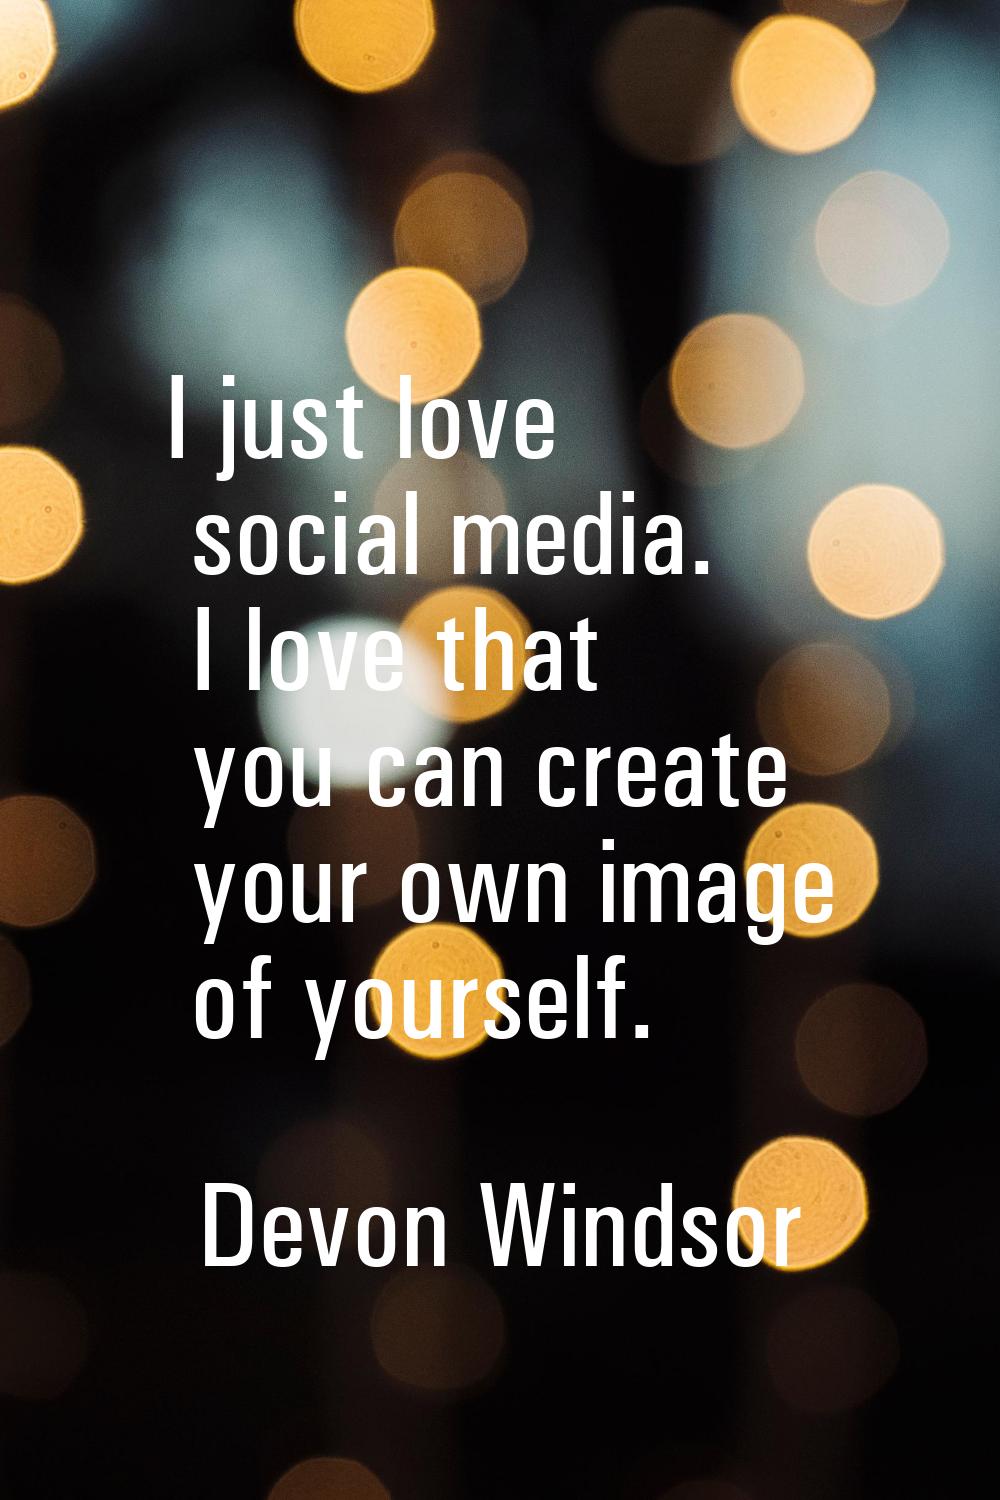 I just love social media. I love that you can create your own image of yourself.